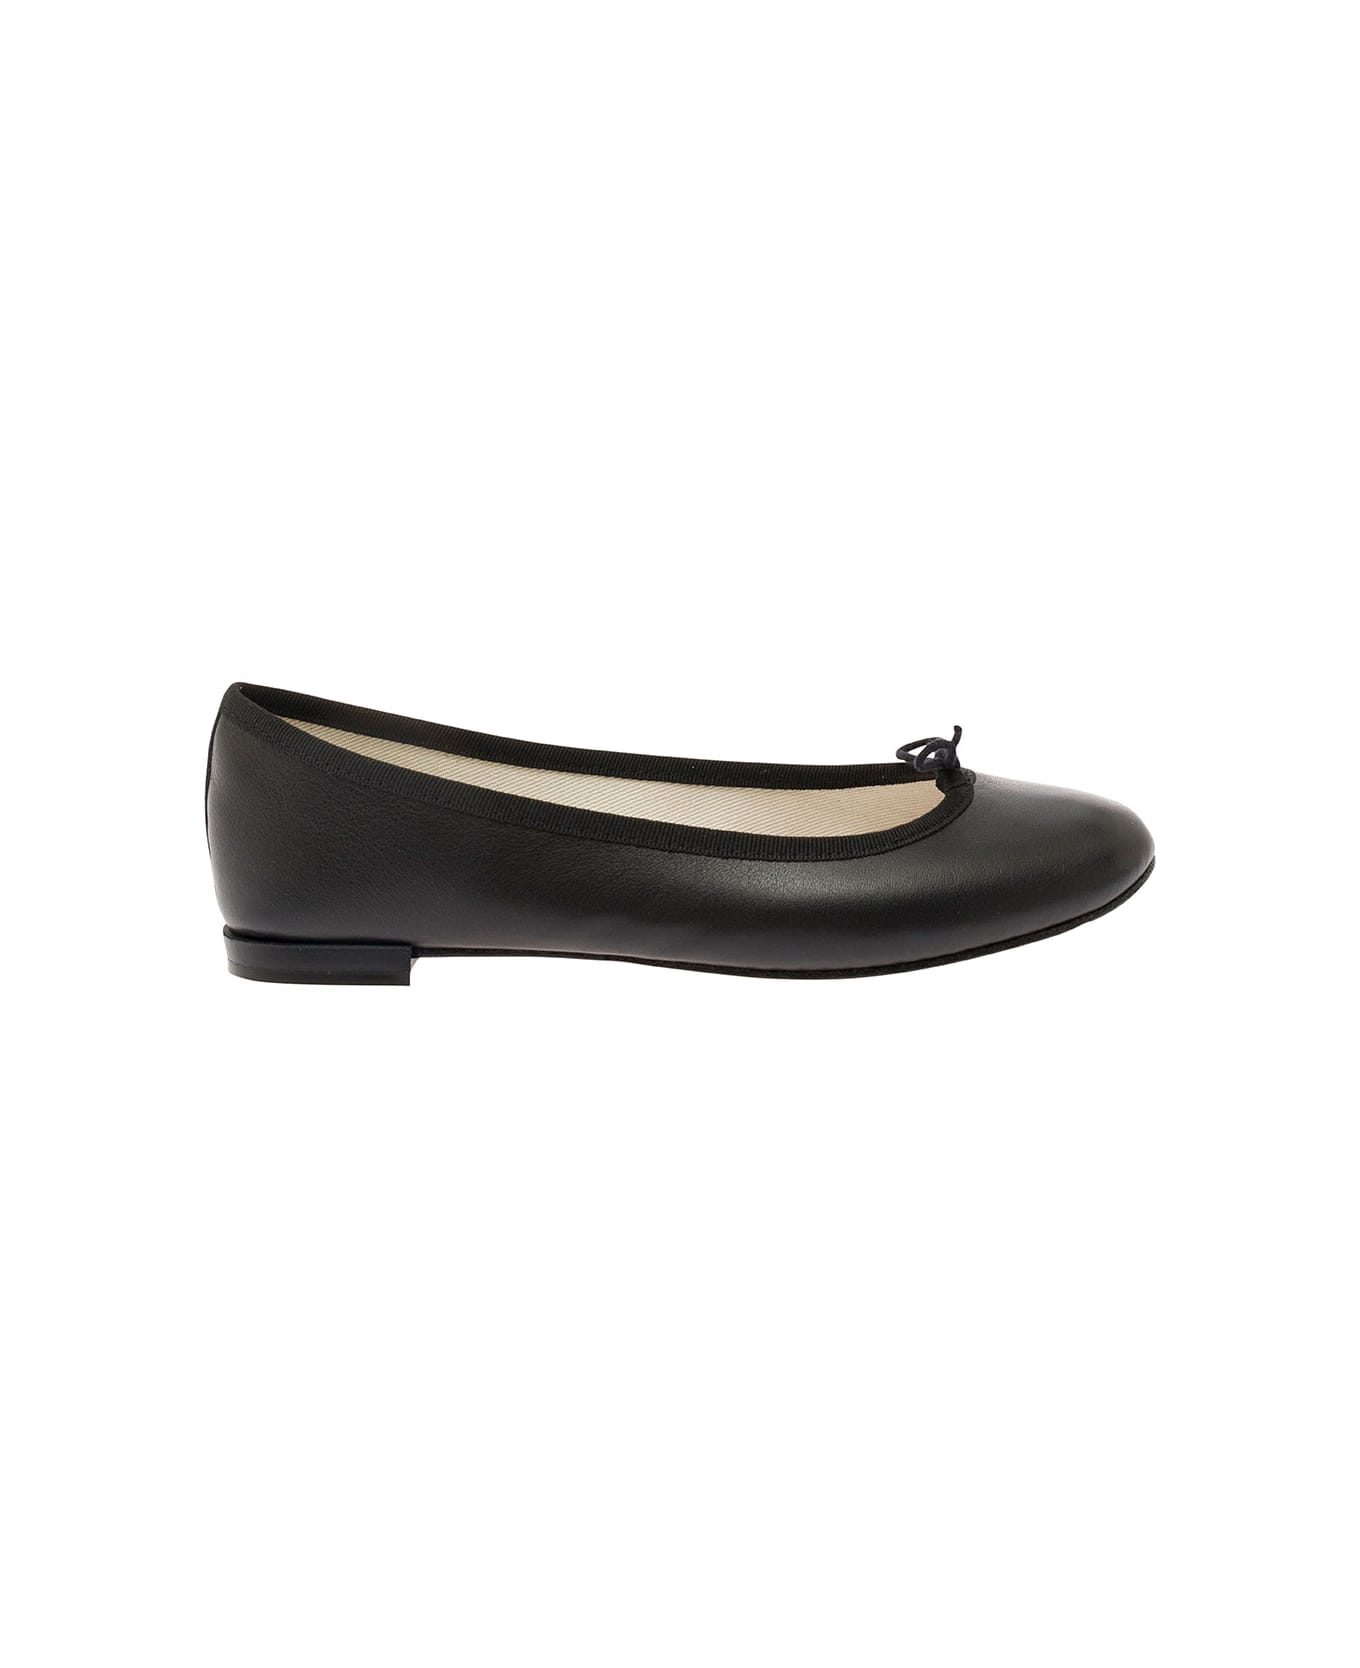 Repetto 'cendrillon' Black Ballet Flats With Bow Detail In Smooth Leather Woman - Black フラットシューズ